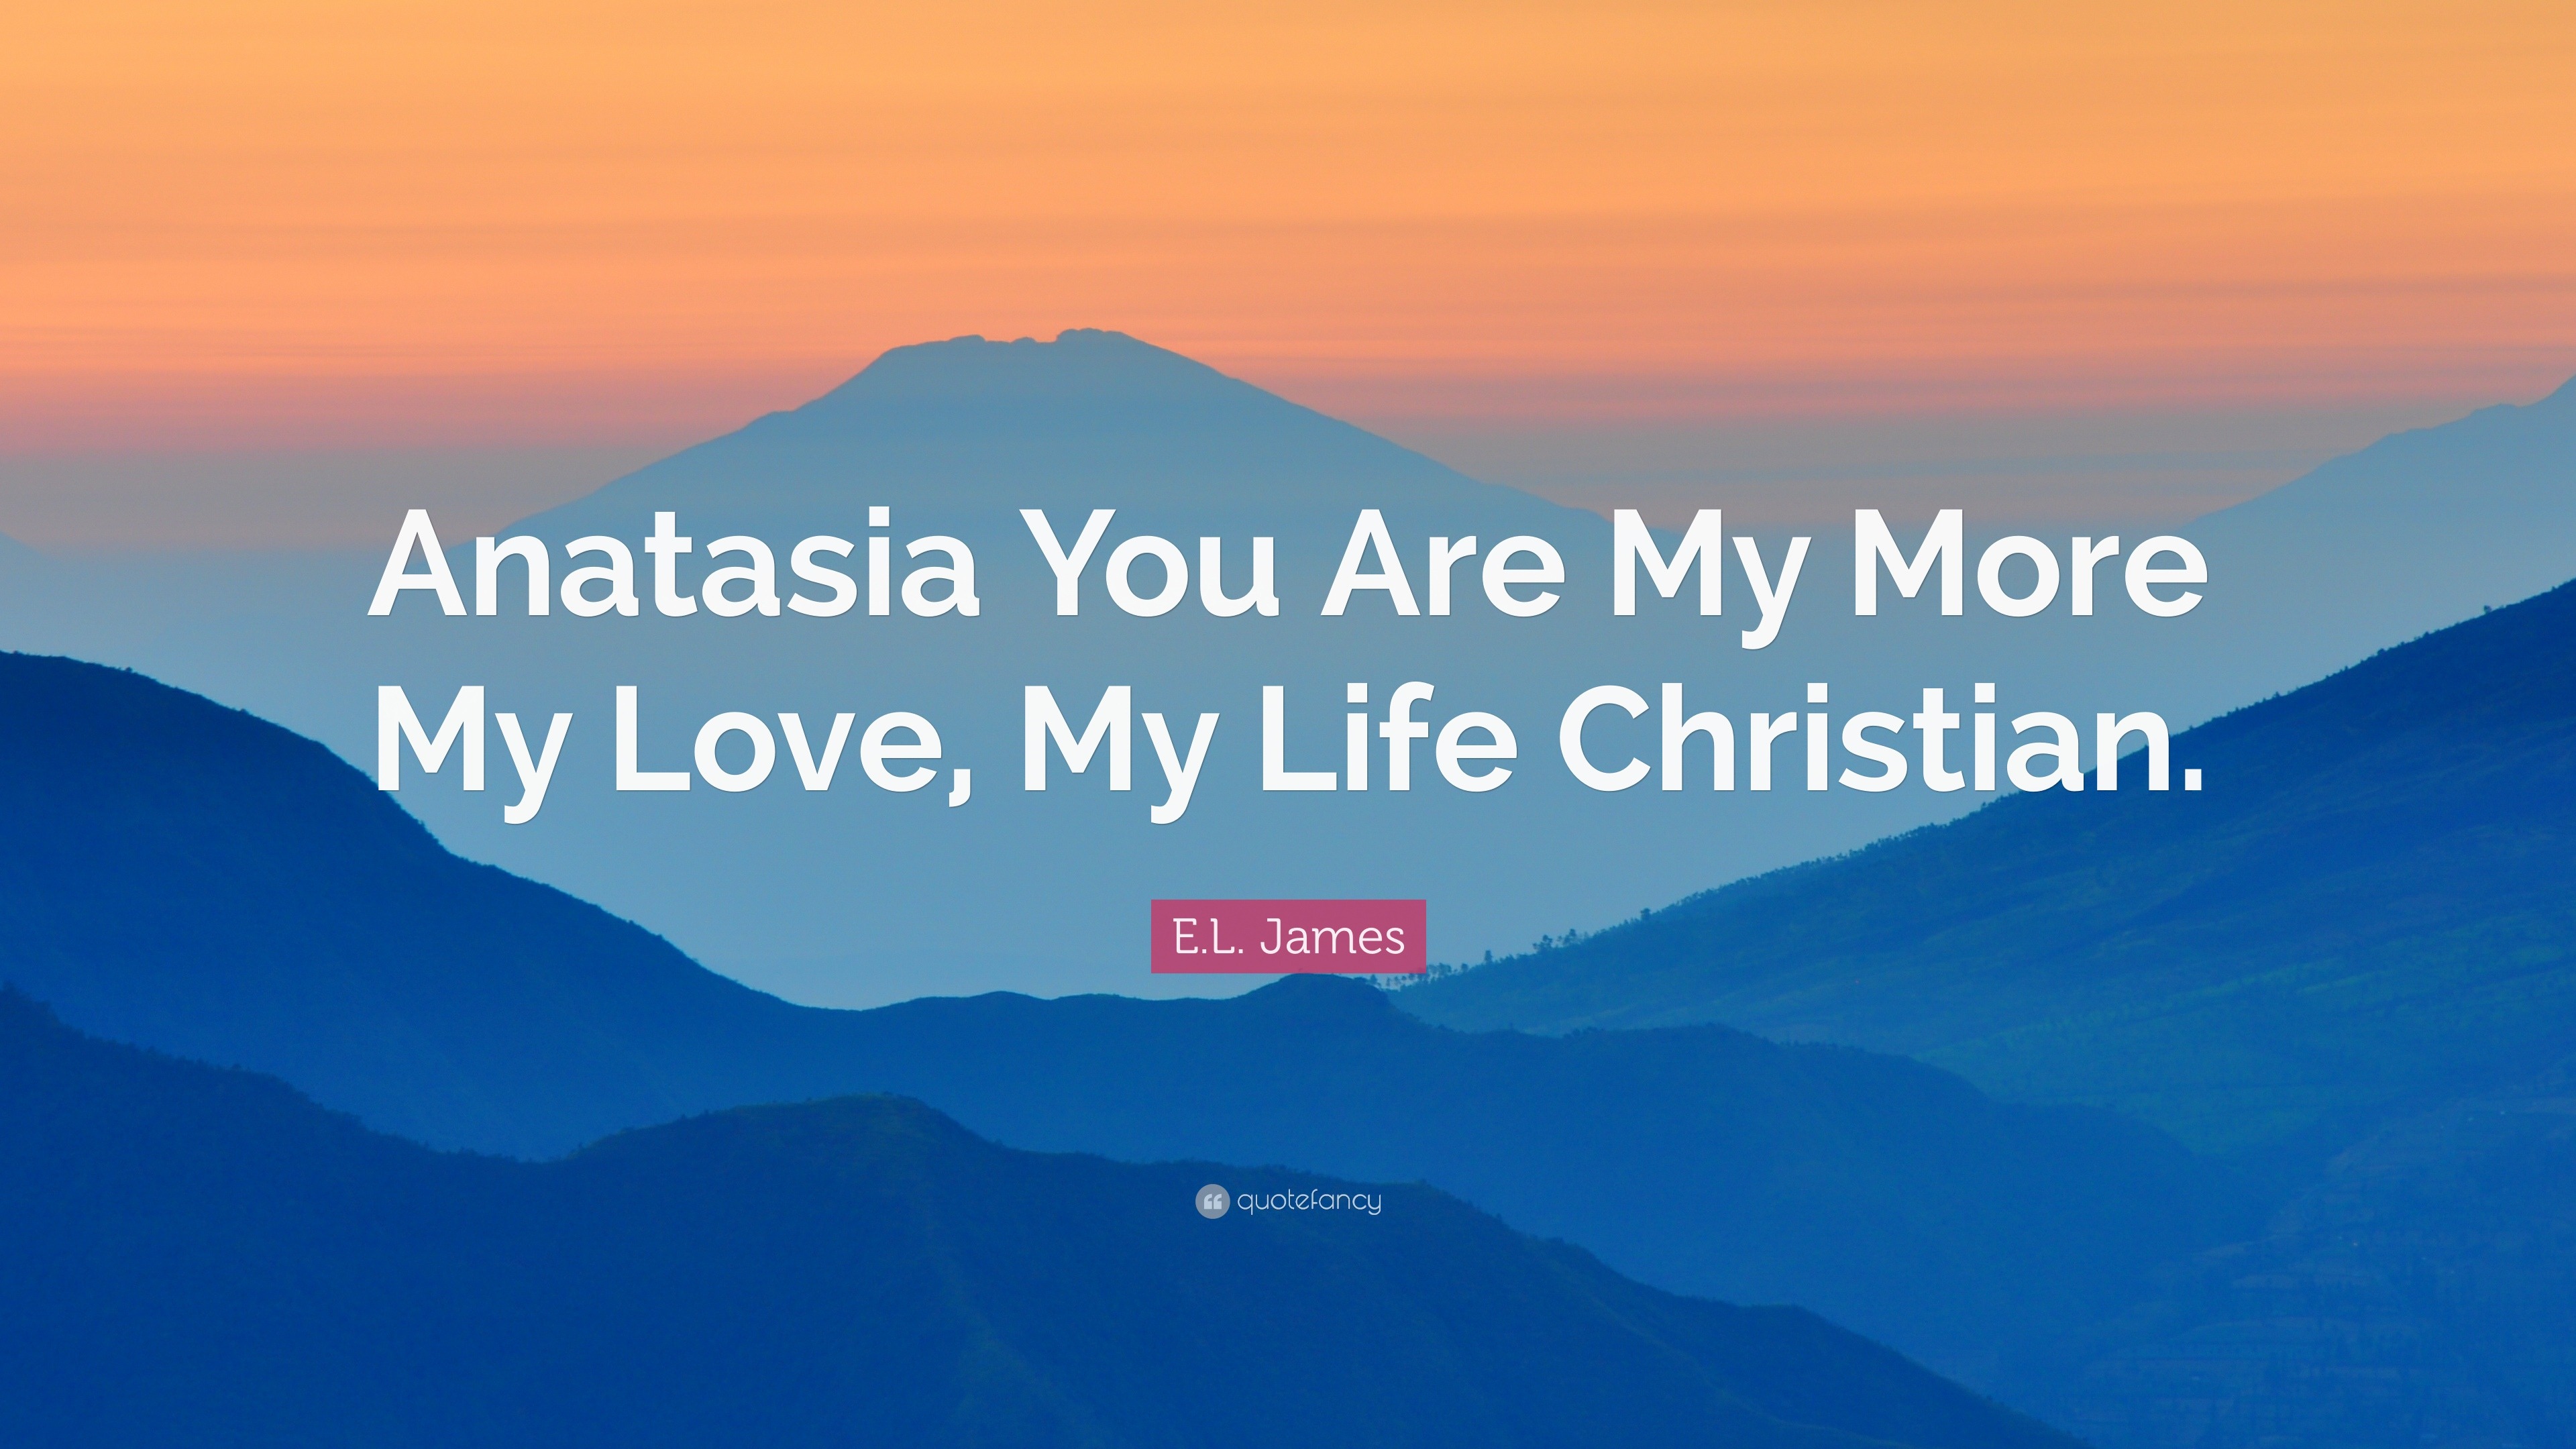 E L James Quote “Anatasia You Are My More My Love My Life Christian